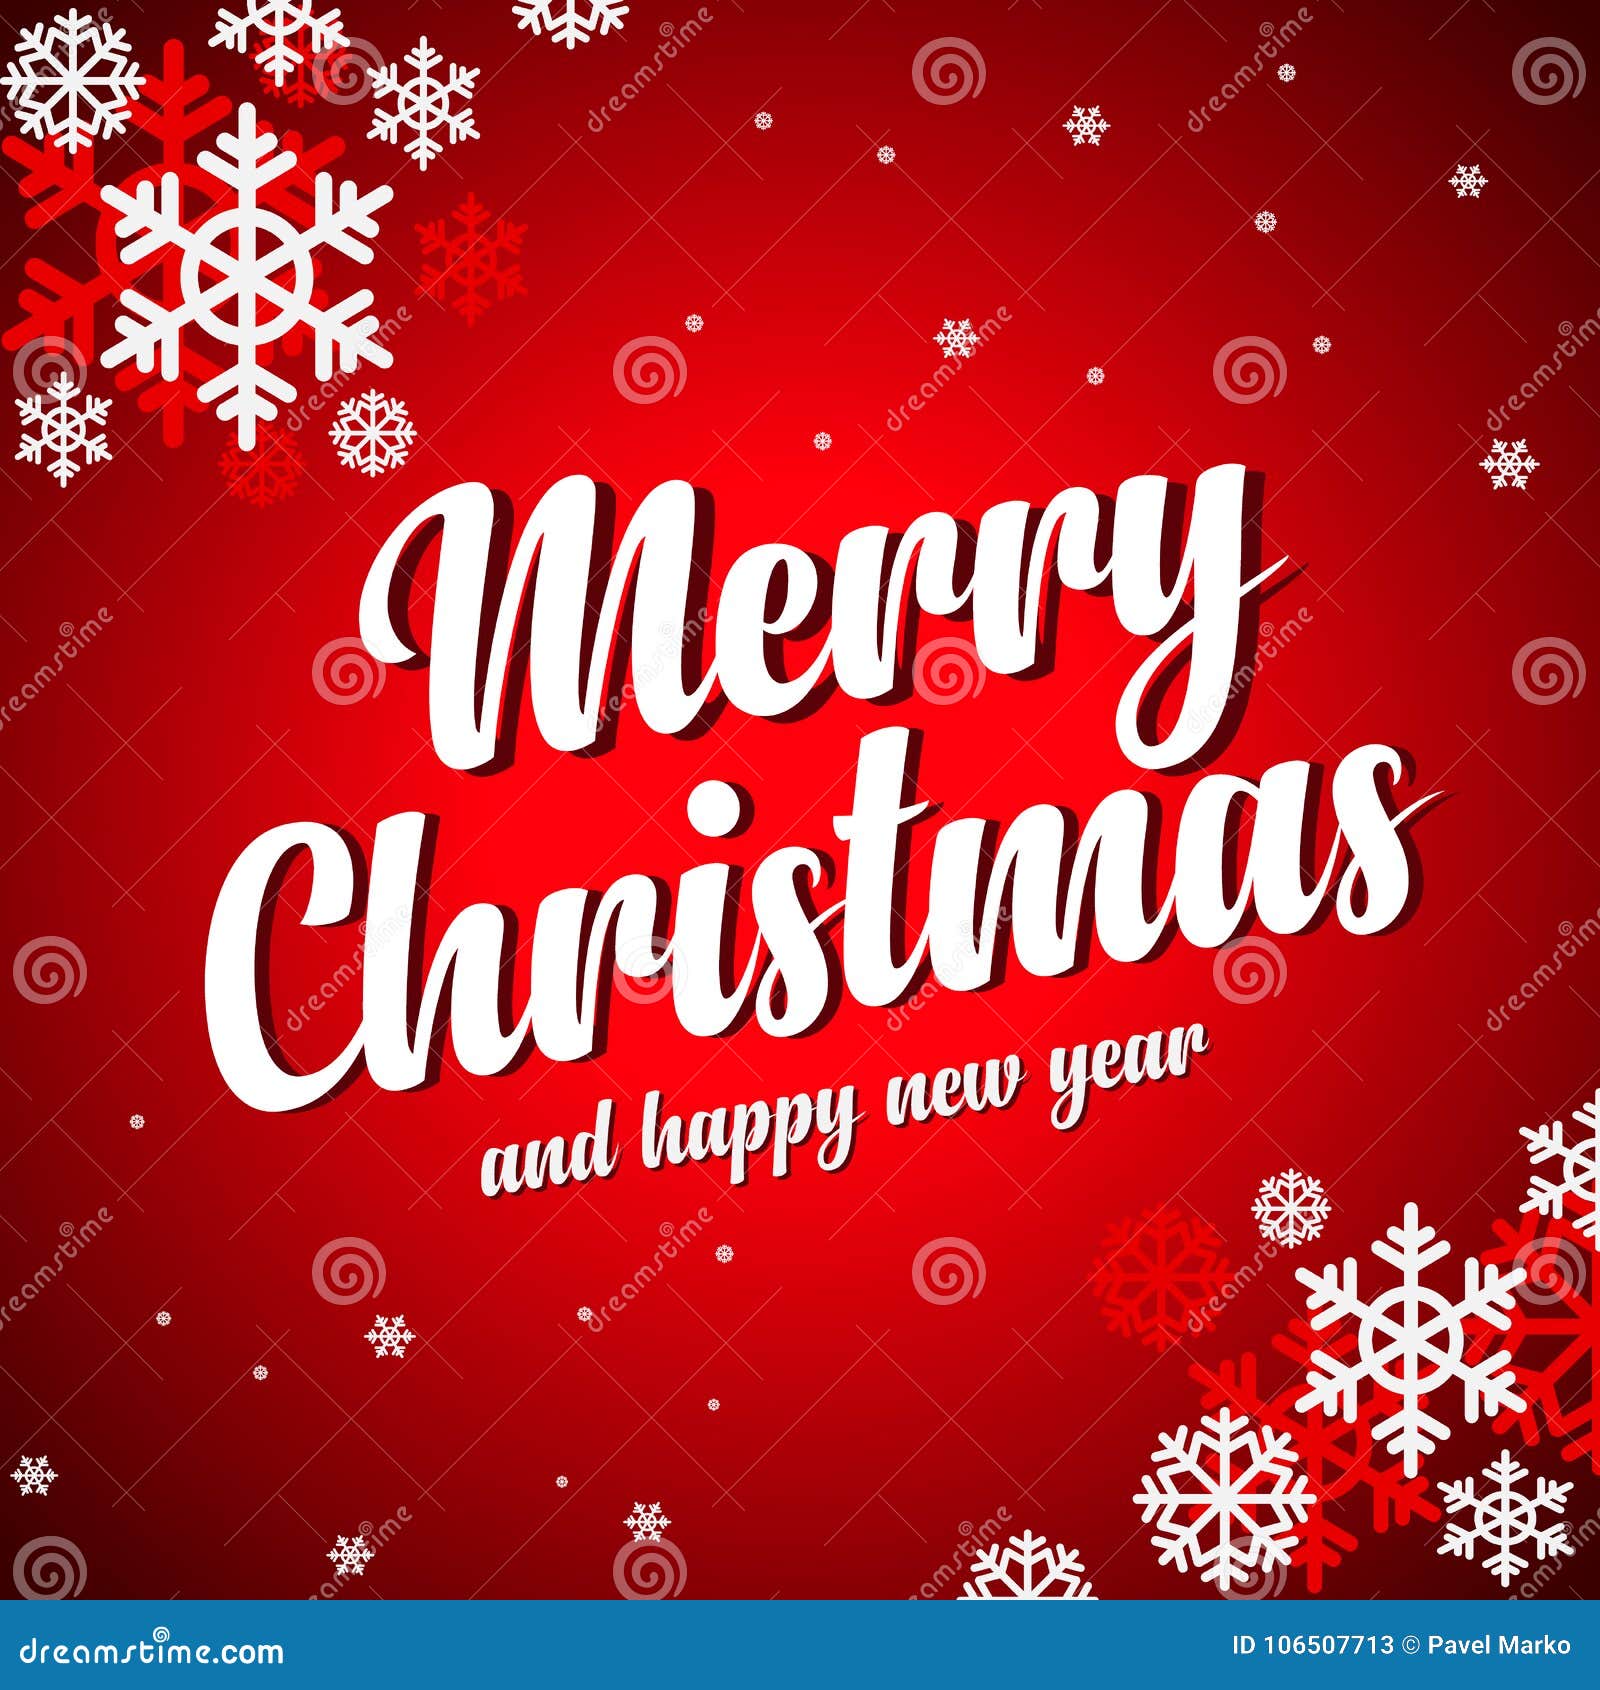 Merry Christmas And Happy New Year Stock Vector Illustration Of